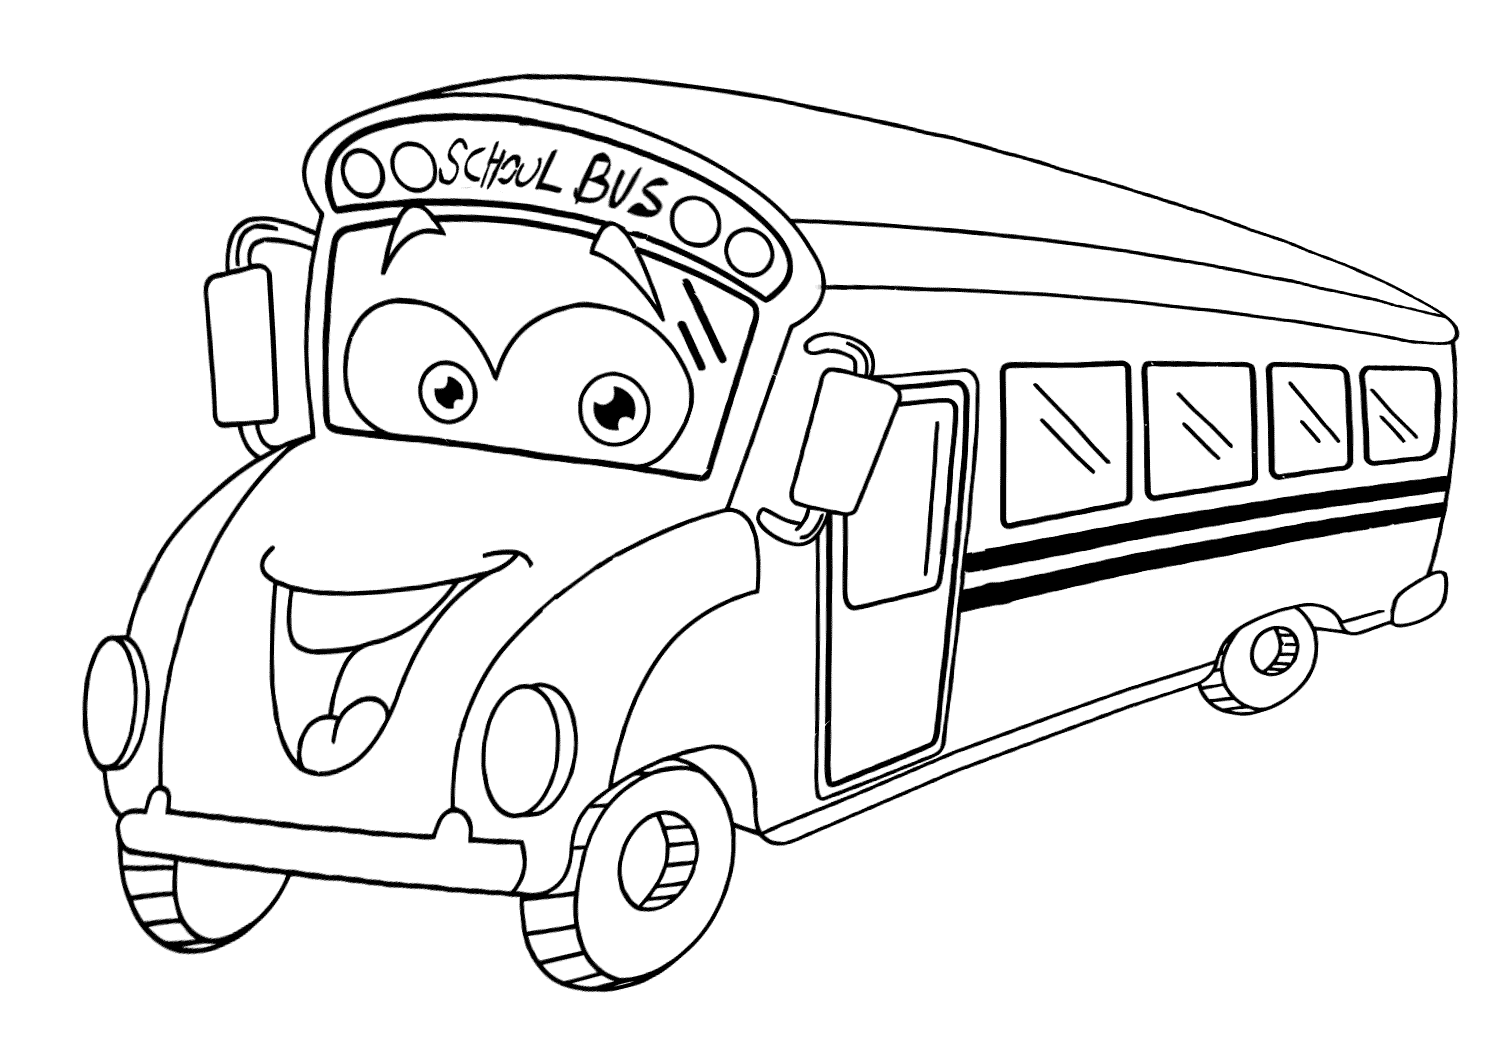 Tayo Coloring Pages to download and print for free